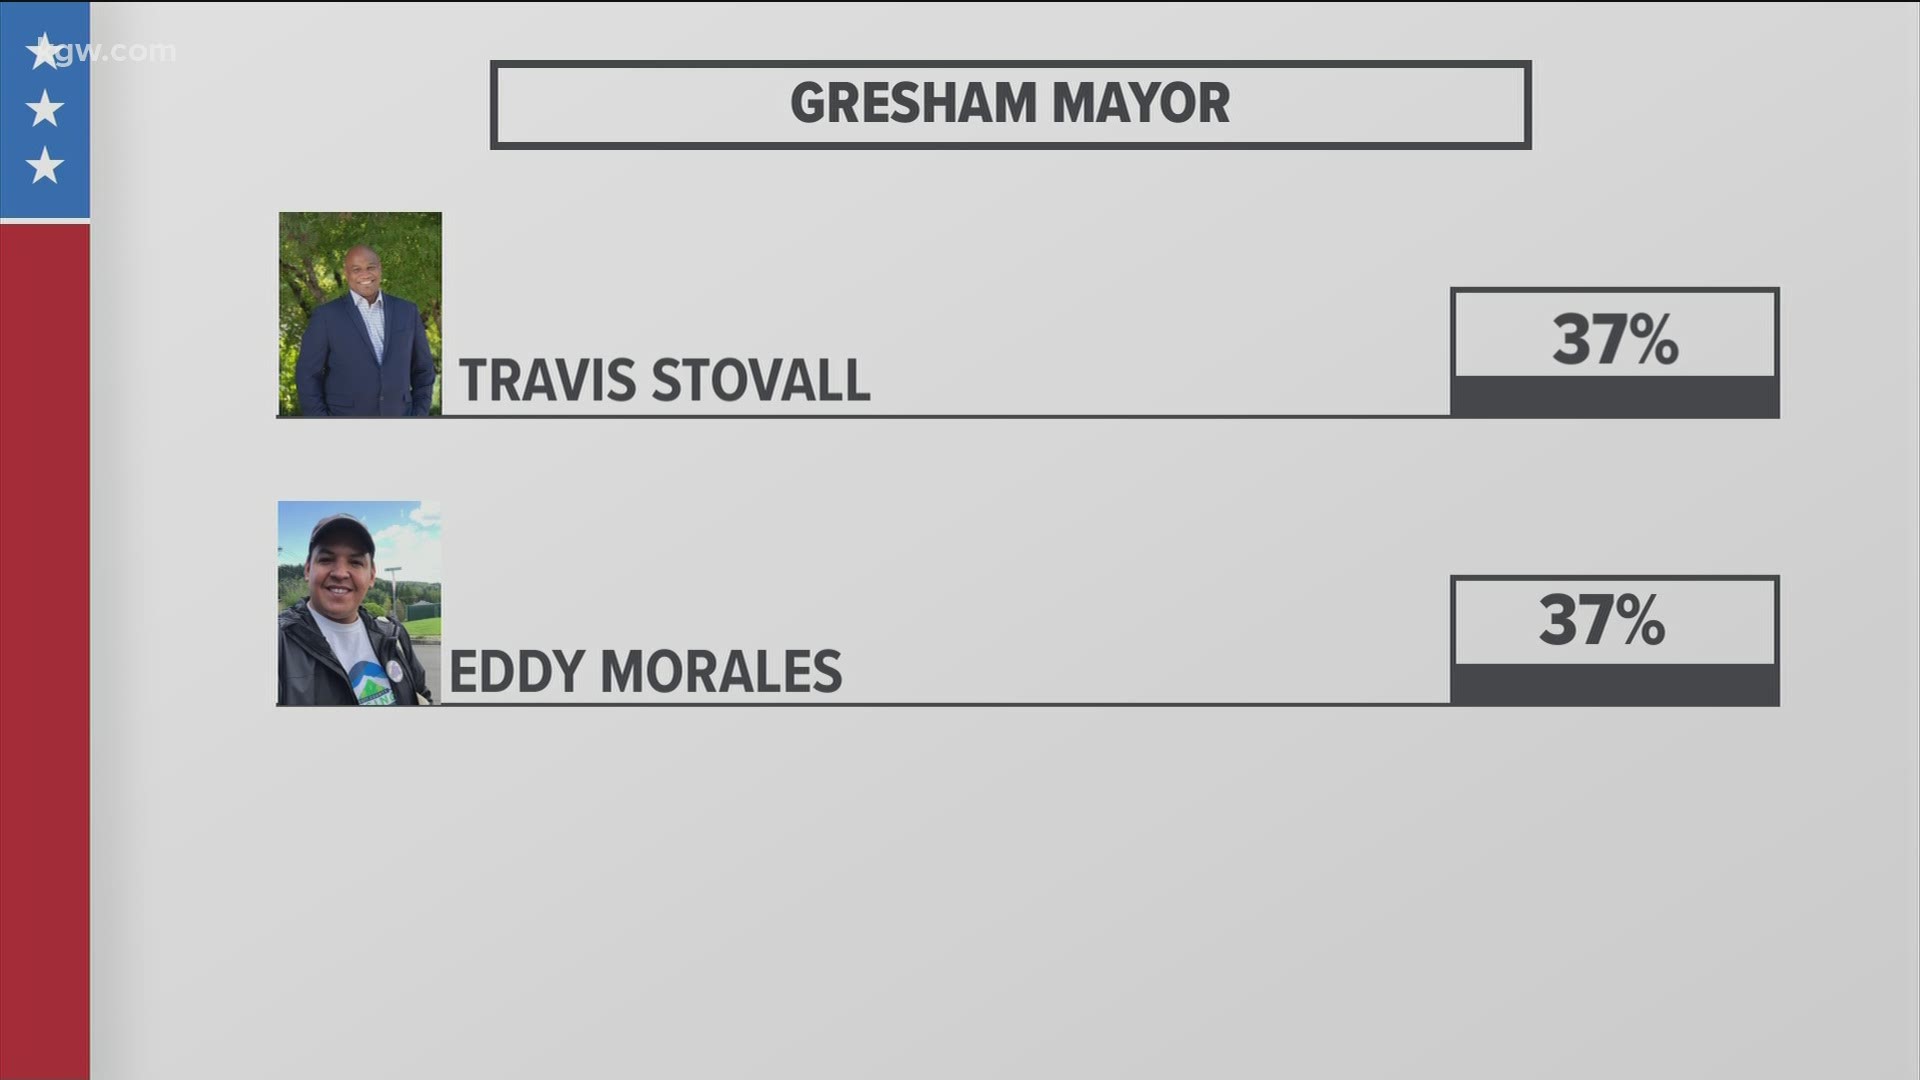 As of Friday, Travis Stovall led Gresham city councilor Eddy Morales by only 67 votes.